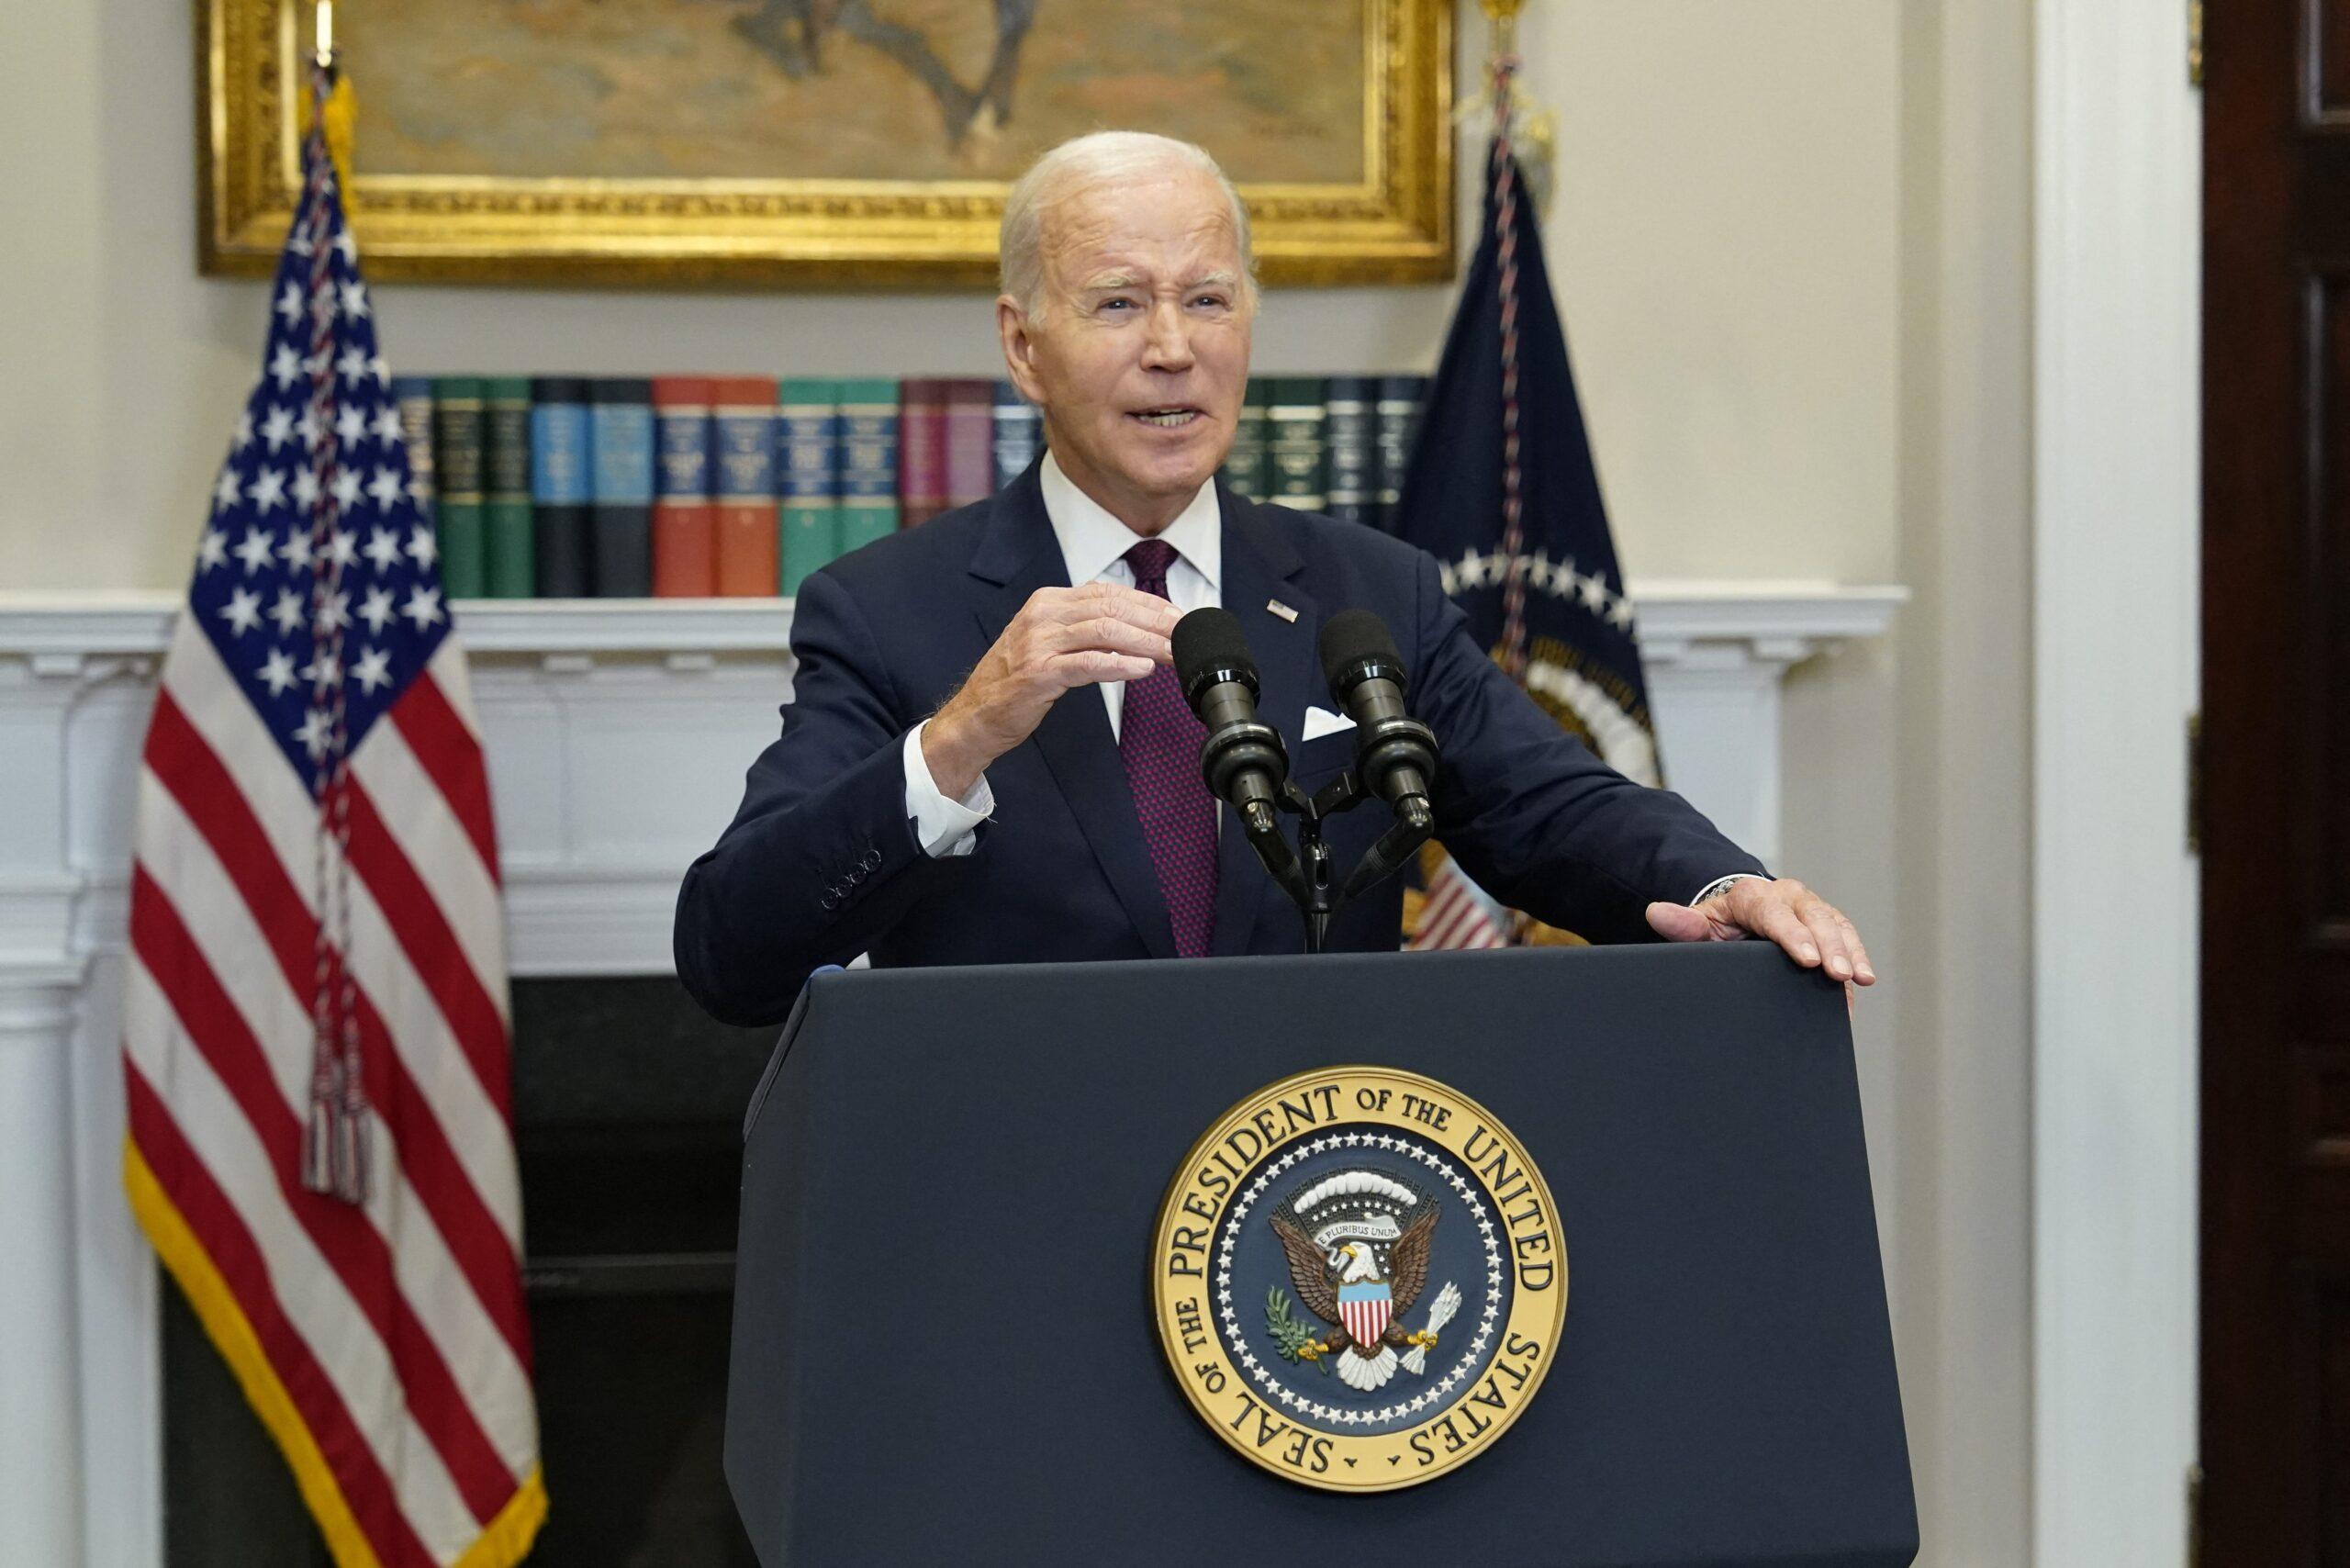 Biden Remarks on the US Supreme Court s Decision on Affirmative Action